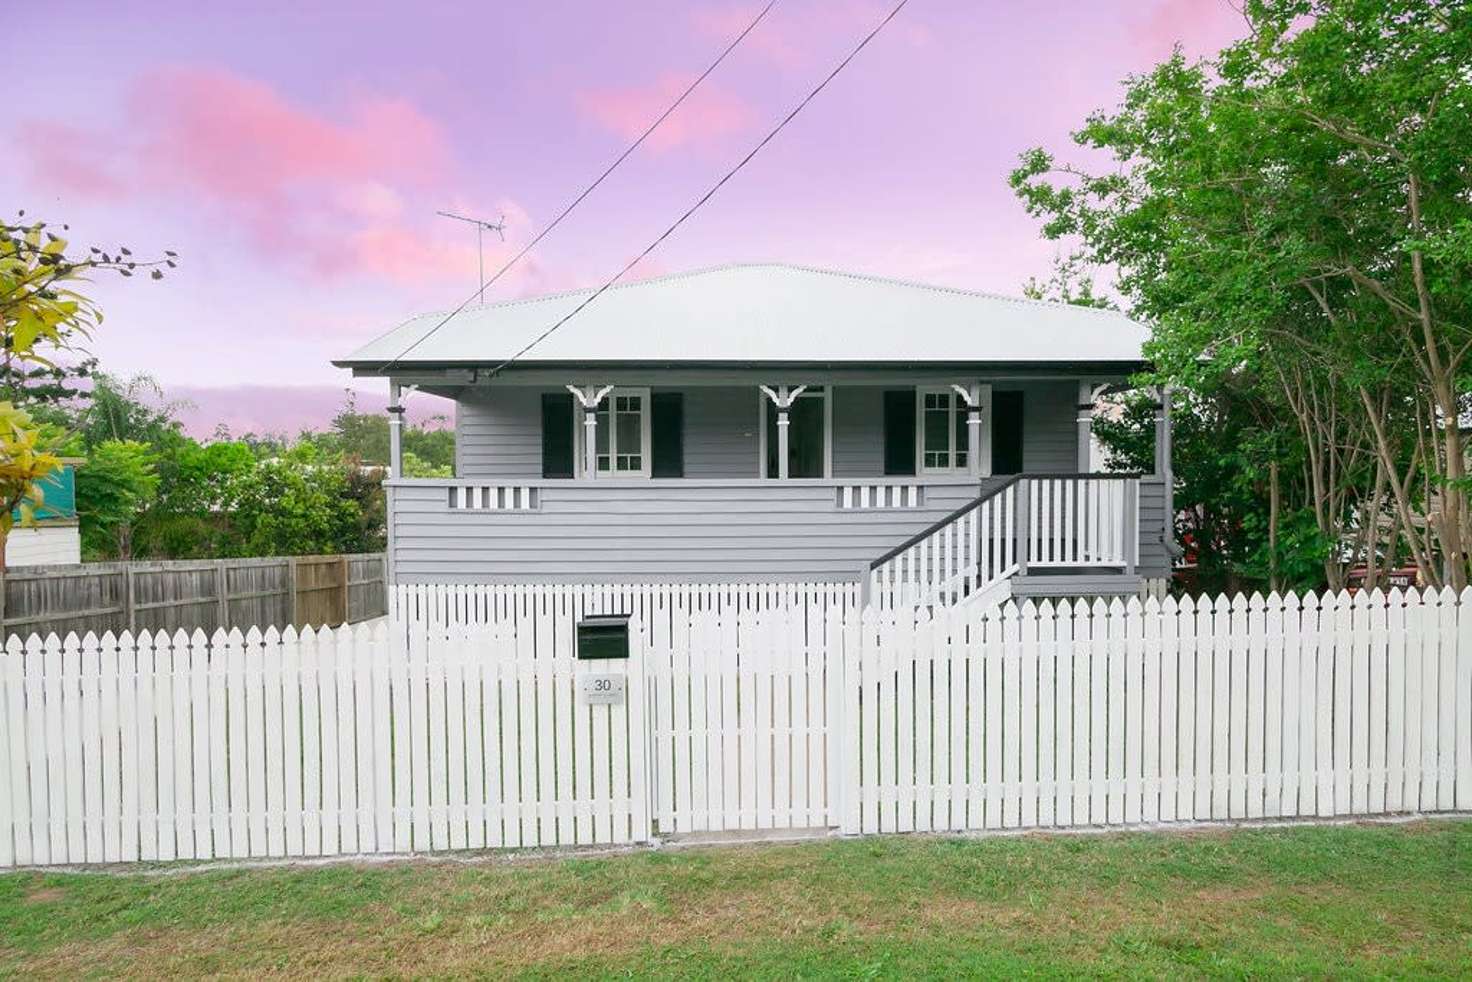 Main view of Homely house listing, 30 Moffatt Street, Ipswich QLD 4305